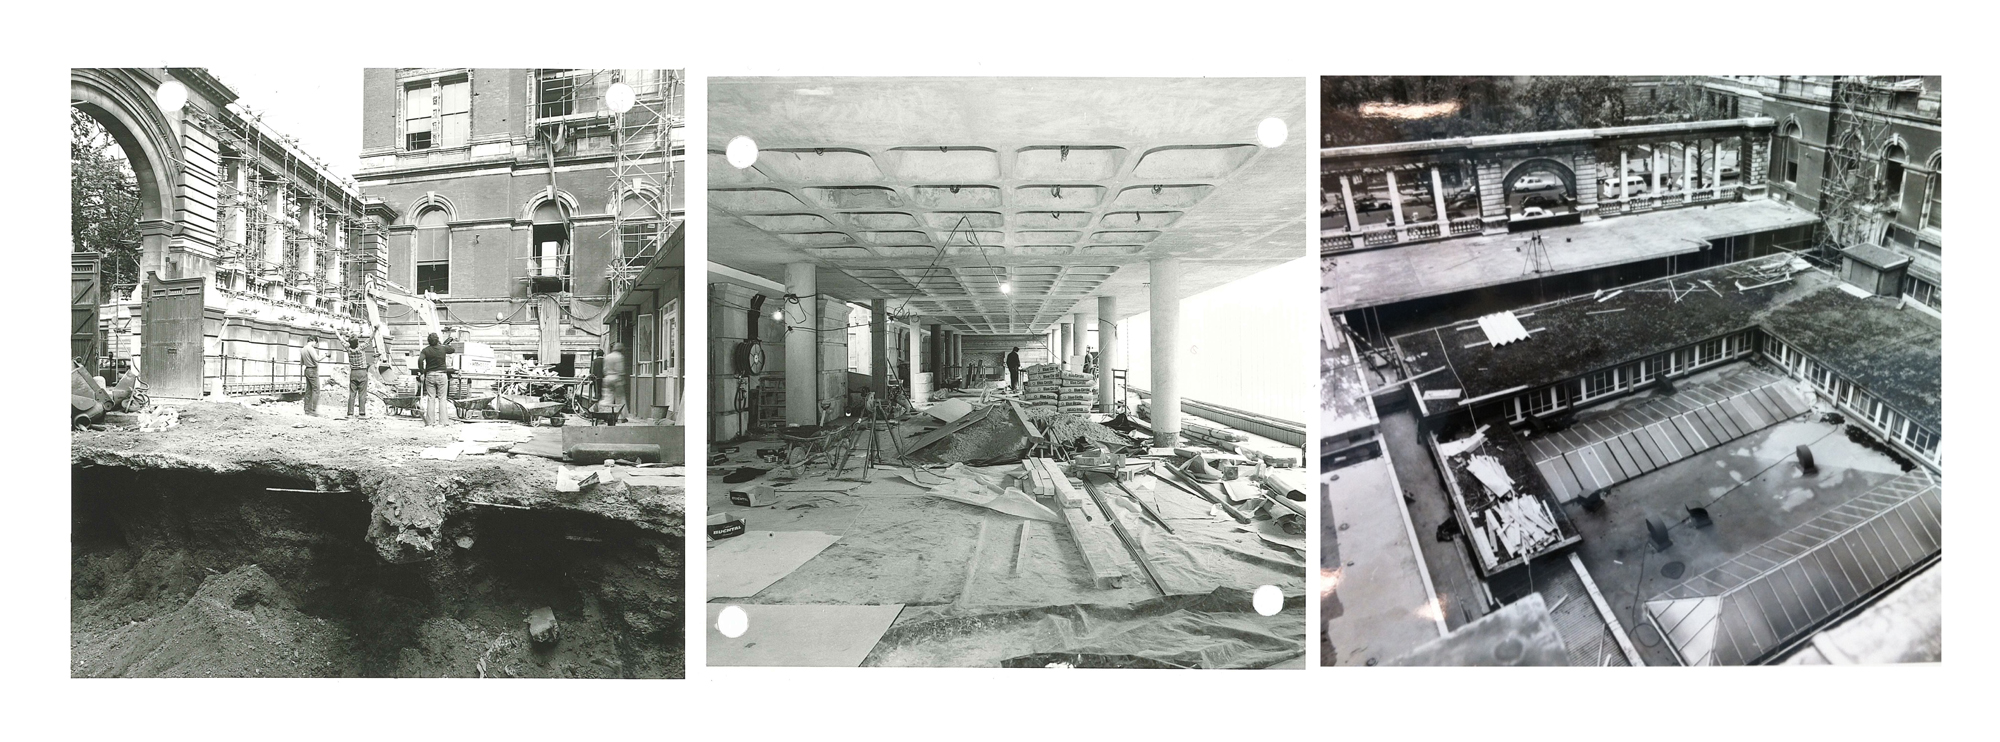 Images of the design gallery and Sackler link construction, 1979.  